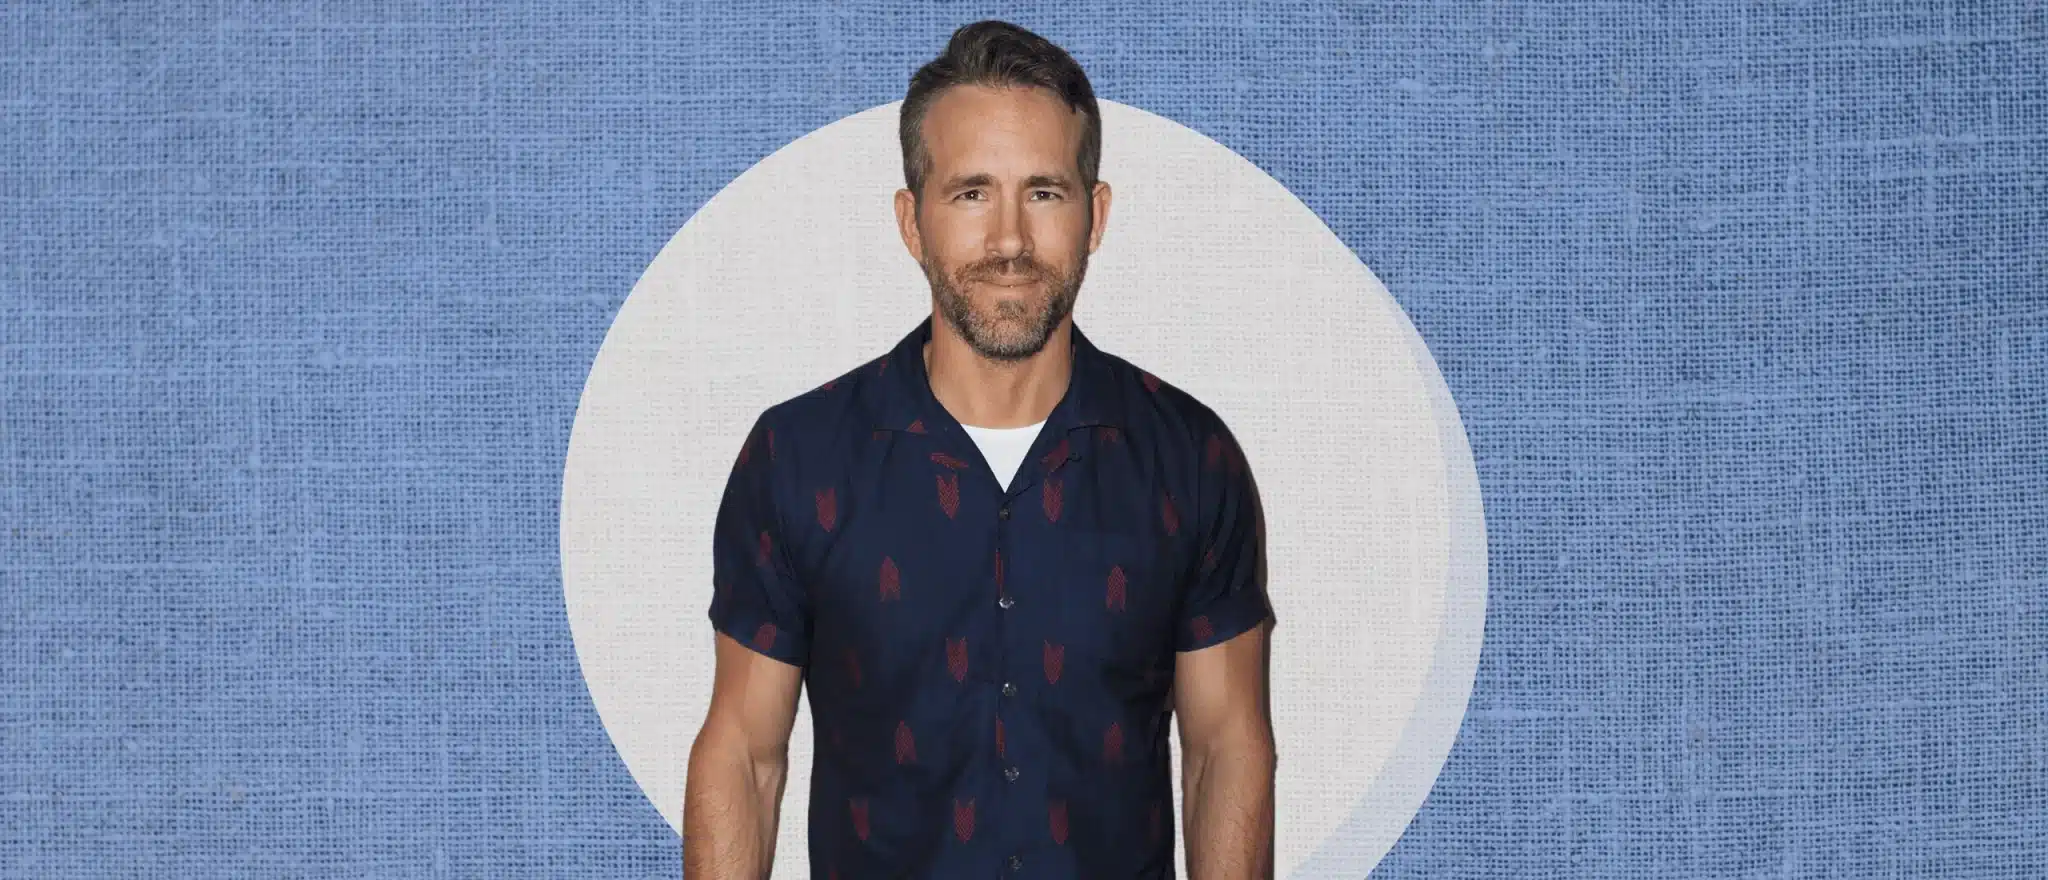 6 Health Habits You Should Poach From Ryan Reynolds to Look Better With Age